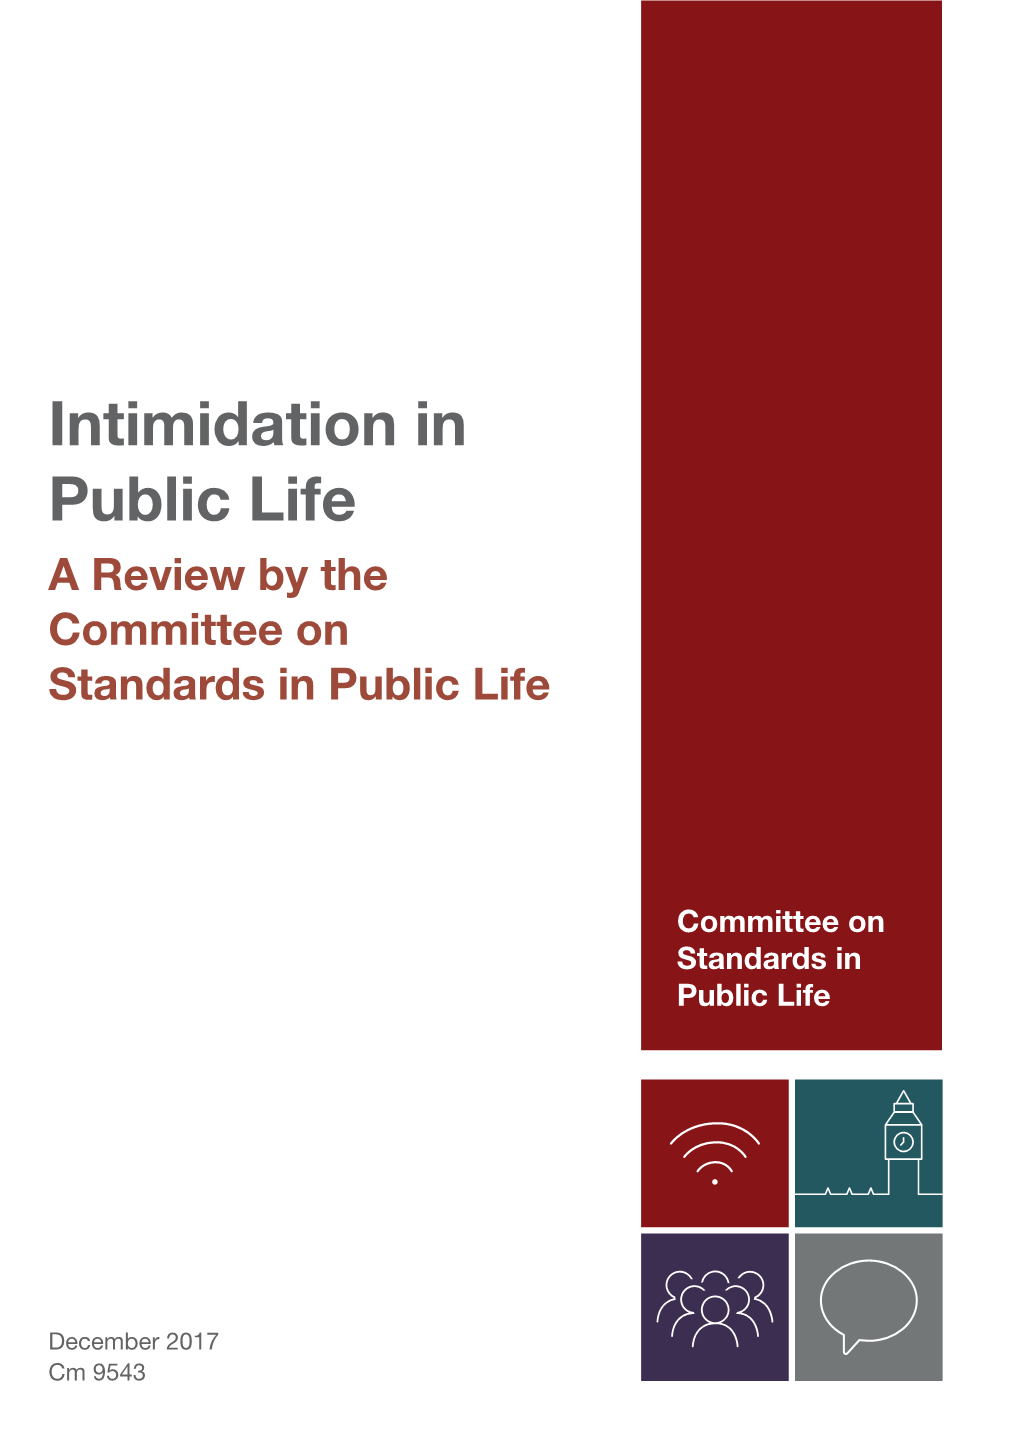 Intimidation in Public Life a Review by the Committee on Standards in Public Life